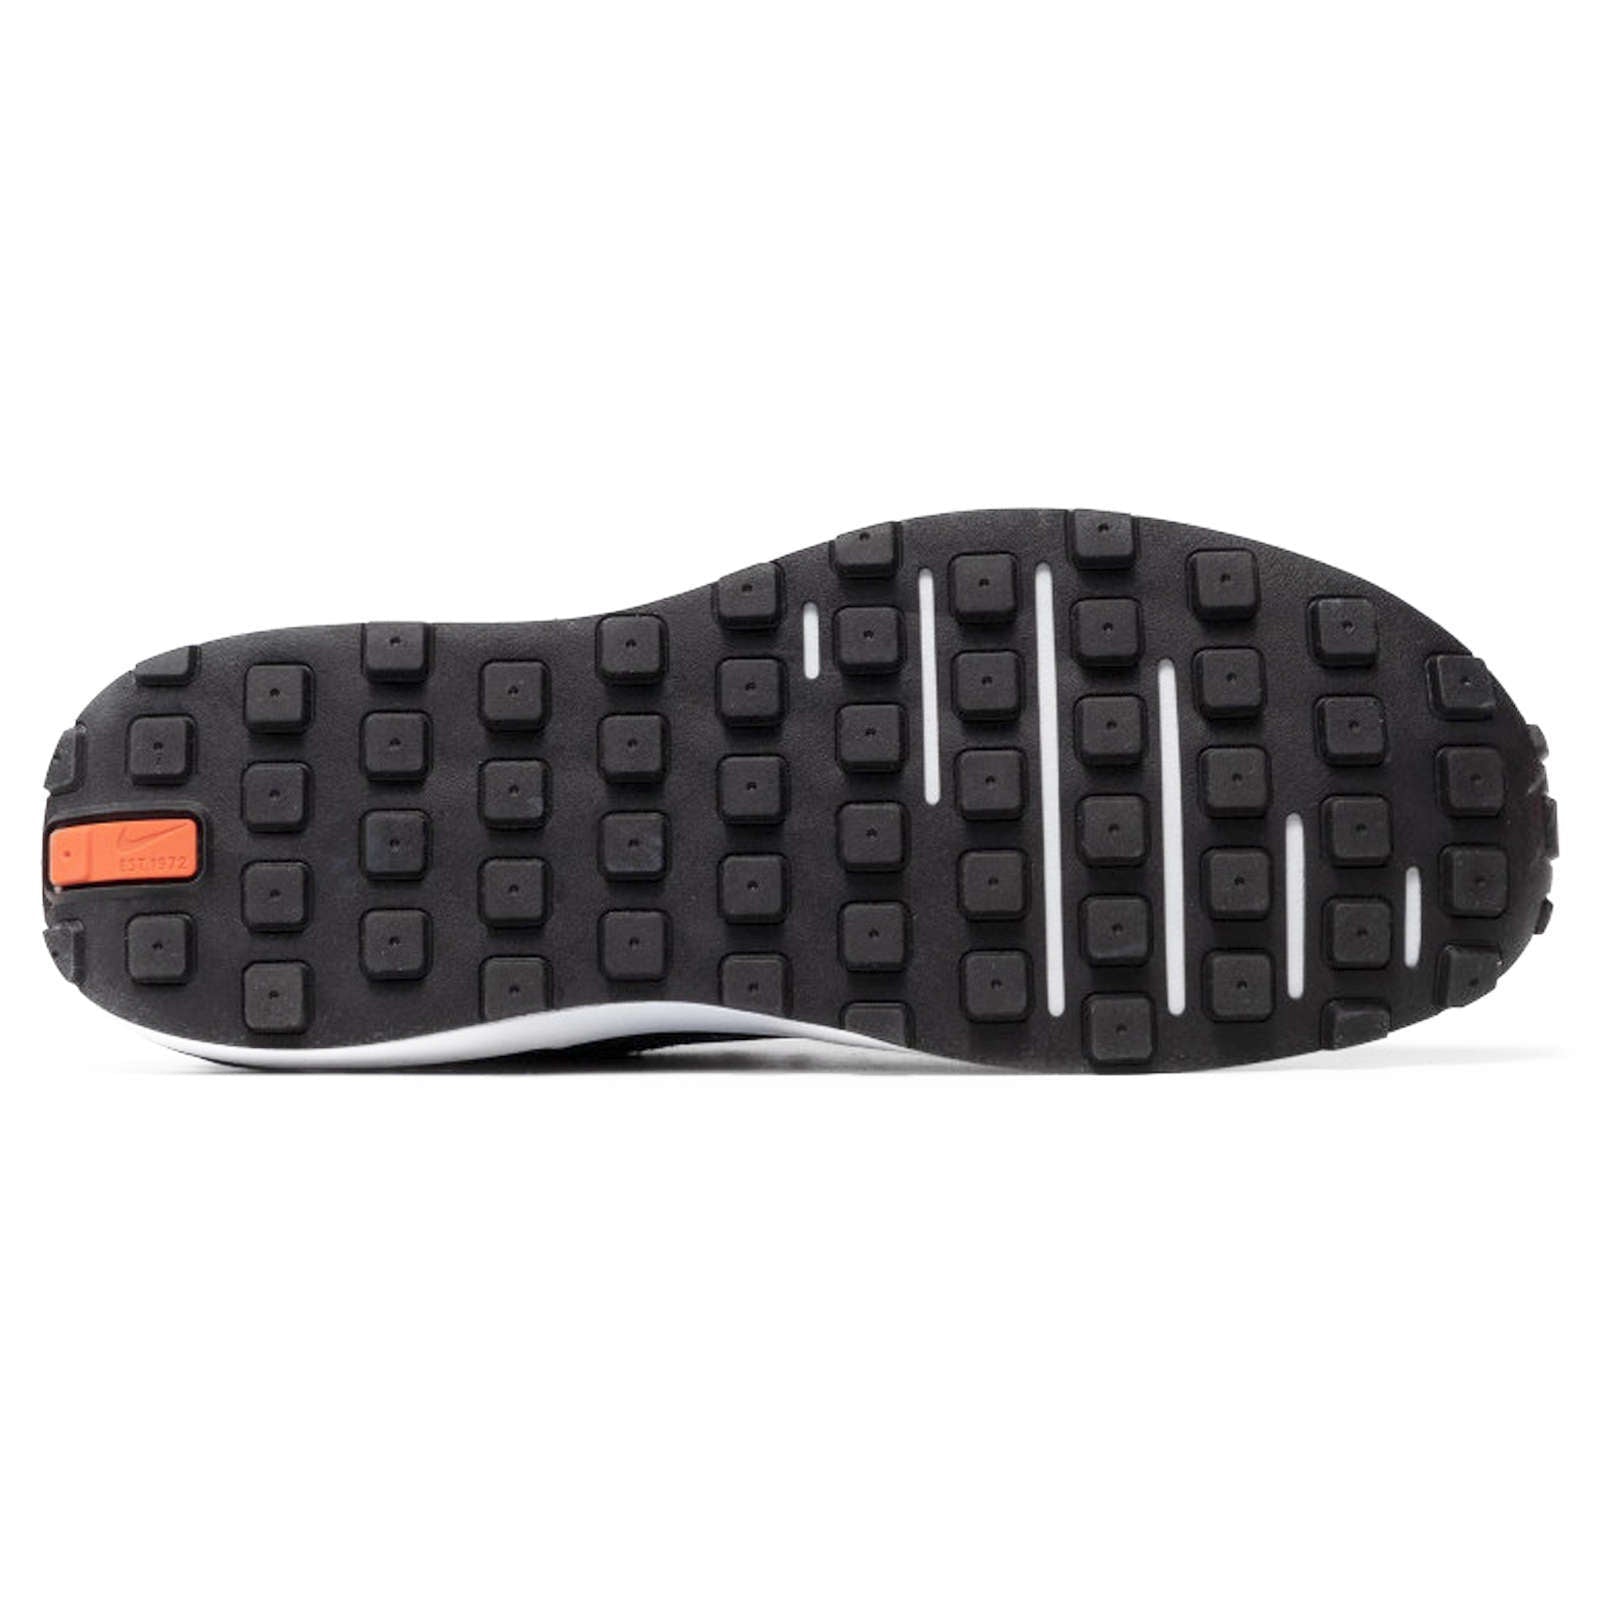 Nike Waffle One Leather Textile Men's Low-Top Sneakers#color_black black white orange